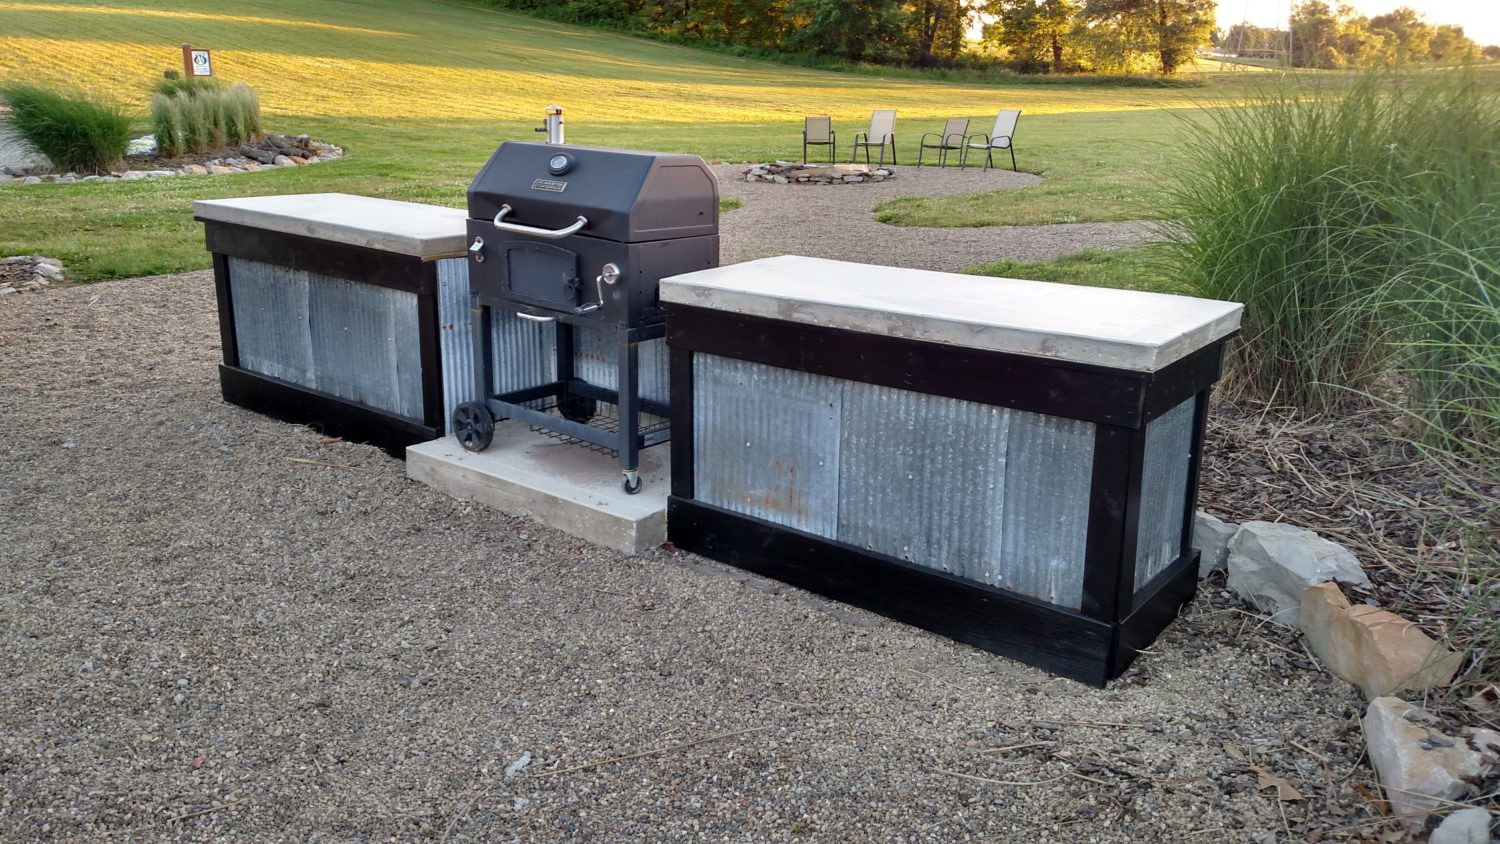 Affordable Outdoor Kitchens
 Creating An Inexpensive Outdoor Kitchen With Concrete